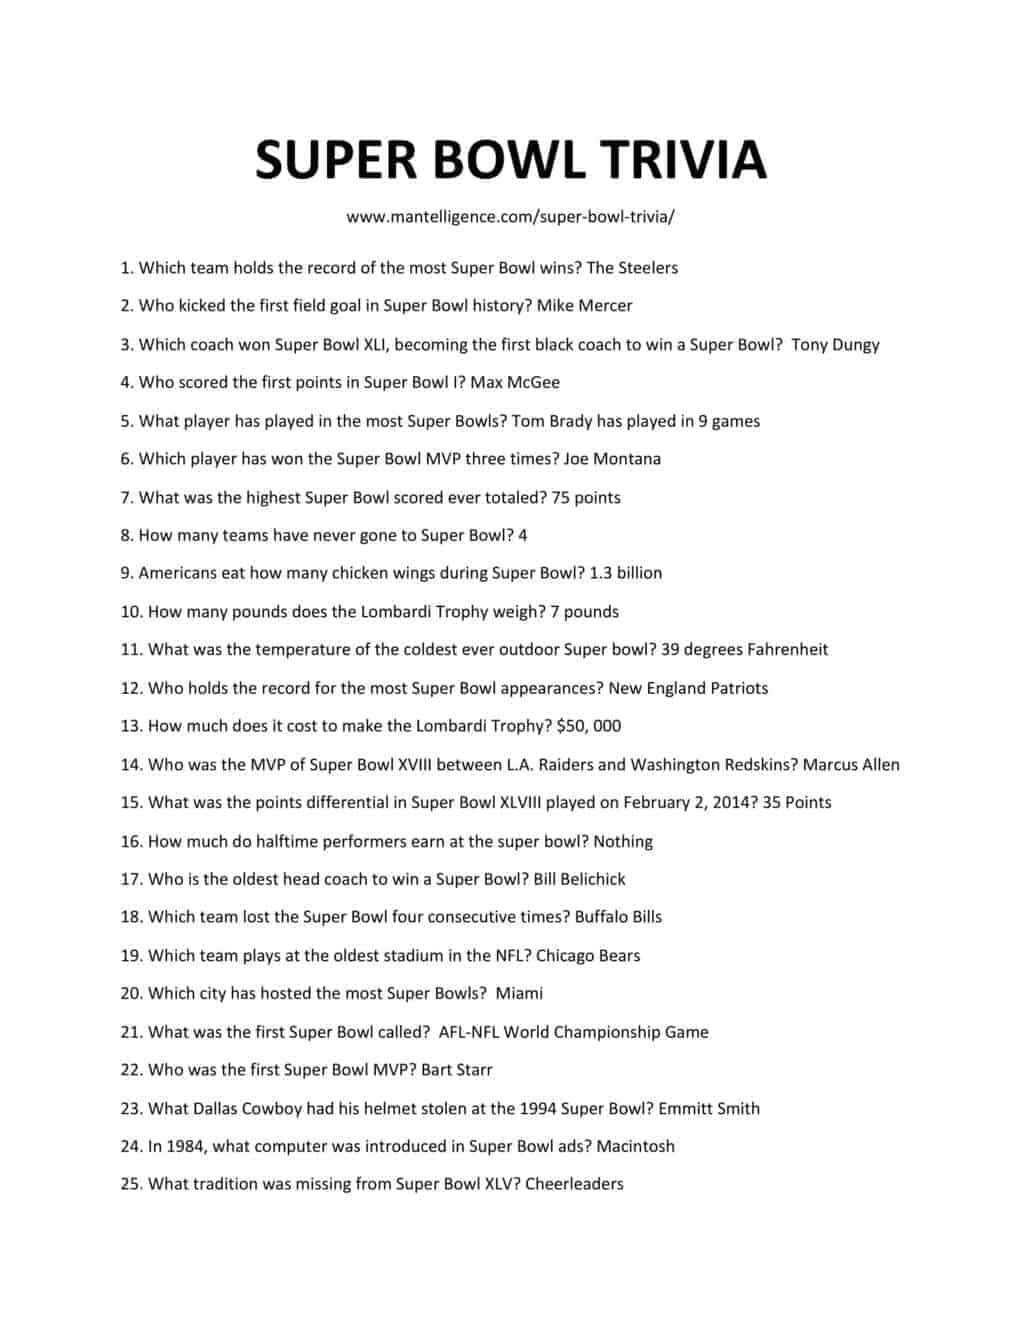 45-best-super-bowl-trivia-questions-and-answers-learn-fun-facts